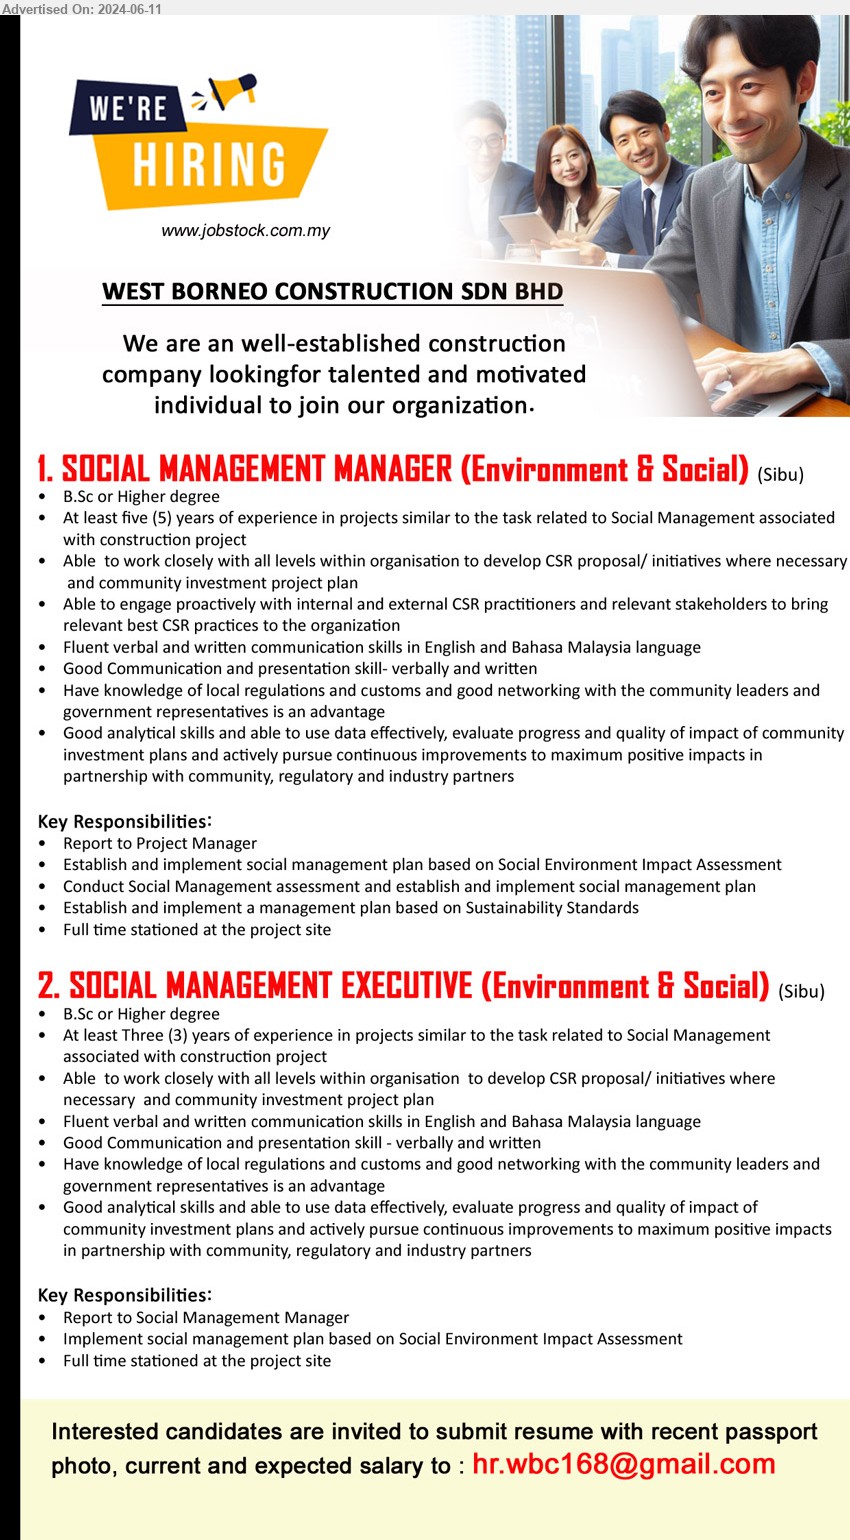 WEST BORNEO CONSTRUCTION SDN BHD - 1. SOCIAL MANAGEMENT MANAGER (Environment & Social) (Sibu), B.Sc or Higher Degree, At least five (5) years of experience in projects similar to the task related to Social Management associated with construction project,...
2. SOCIAL MANAGEMENT EXECUTIVE (Environment & Social) (Sibu), B.Sc or Higher Degree, At least Three (3) years of experience in projects similar to the task related to Social Management associated with construction project,...
Email resume to ...
